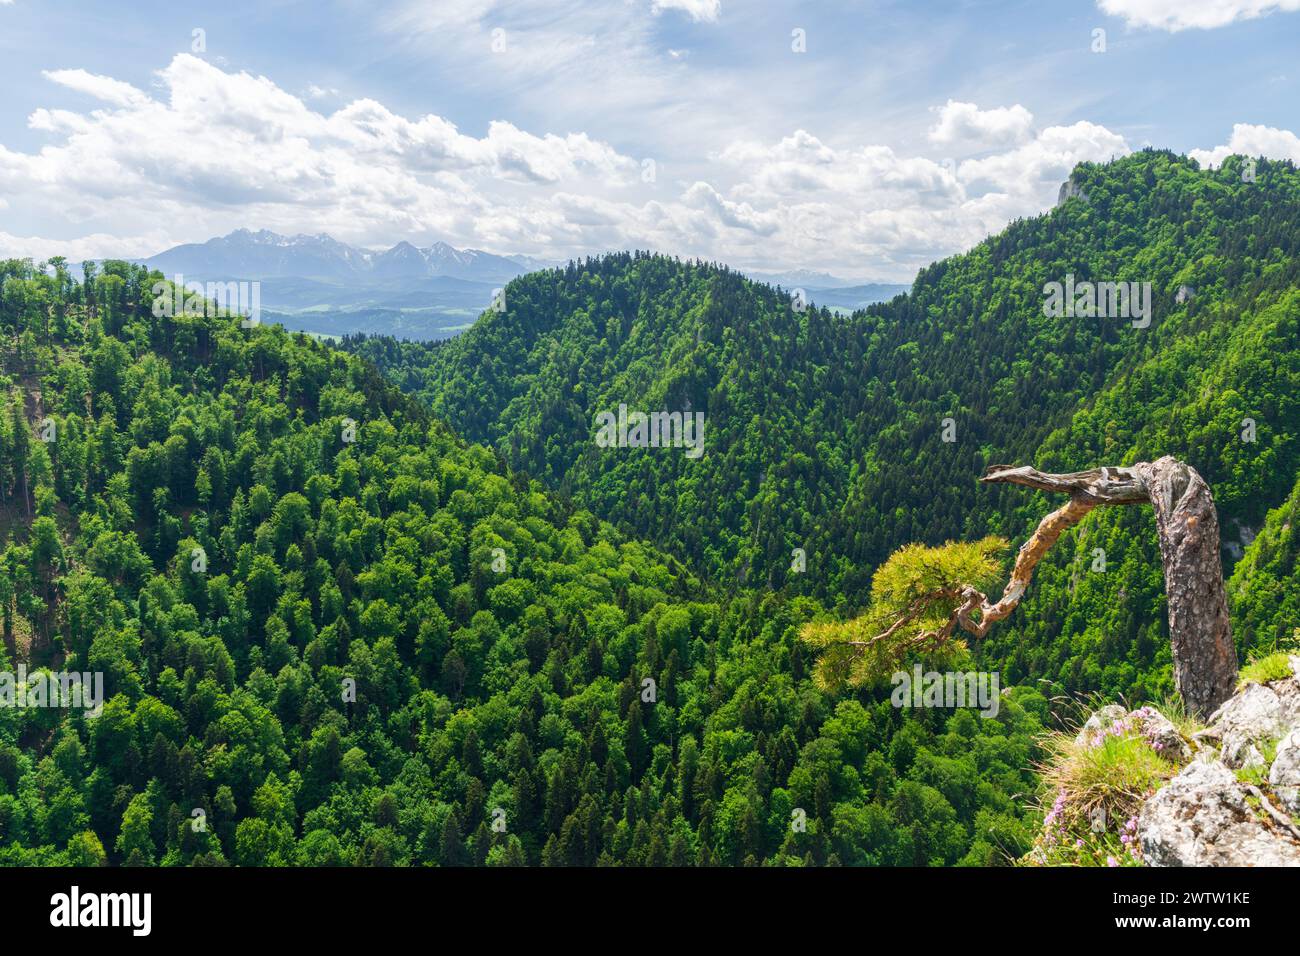 Sunny summer day view from Sokolica peak in Pieniny Mountains with a famous dwarf pine tree at the top, Poland with covered with green trees. Stock Photo